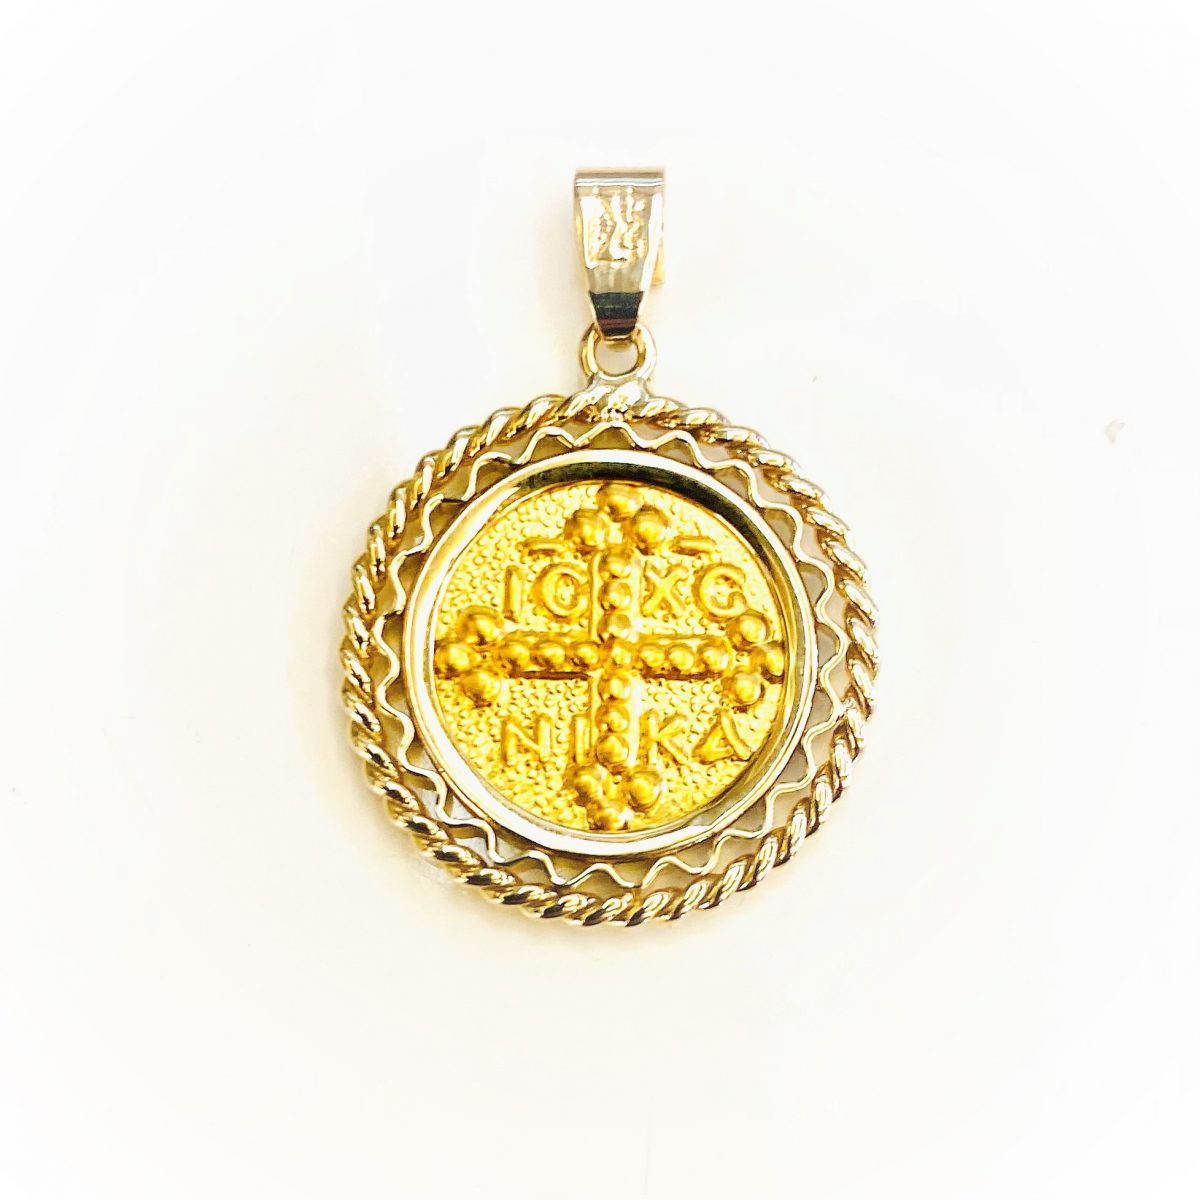 Konstantinato Medallion-Amulet of two-sided